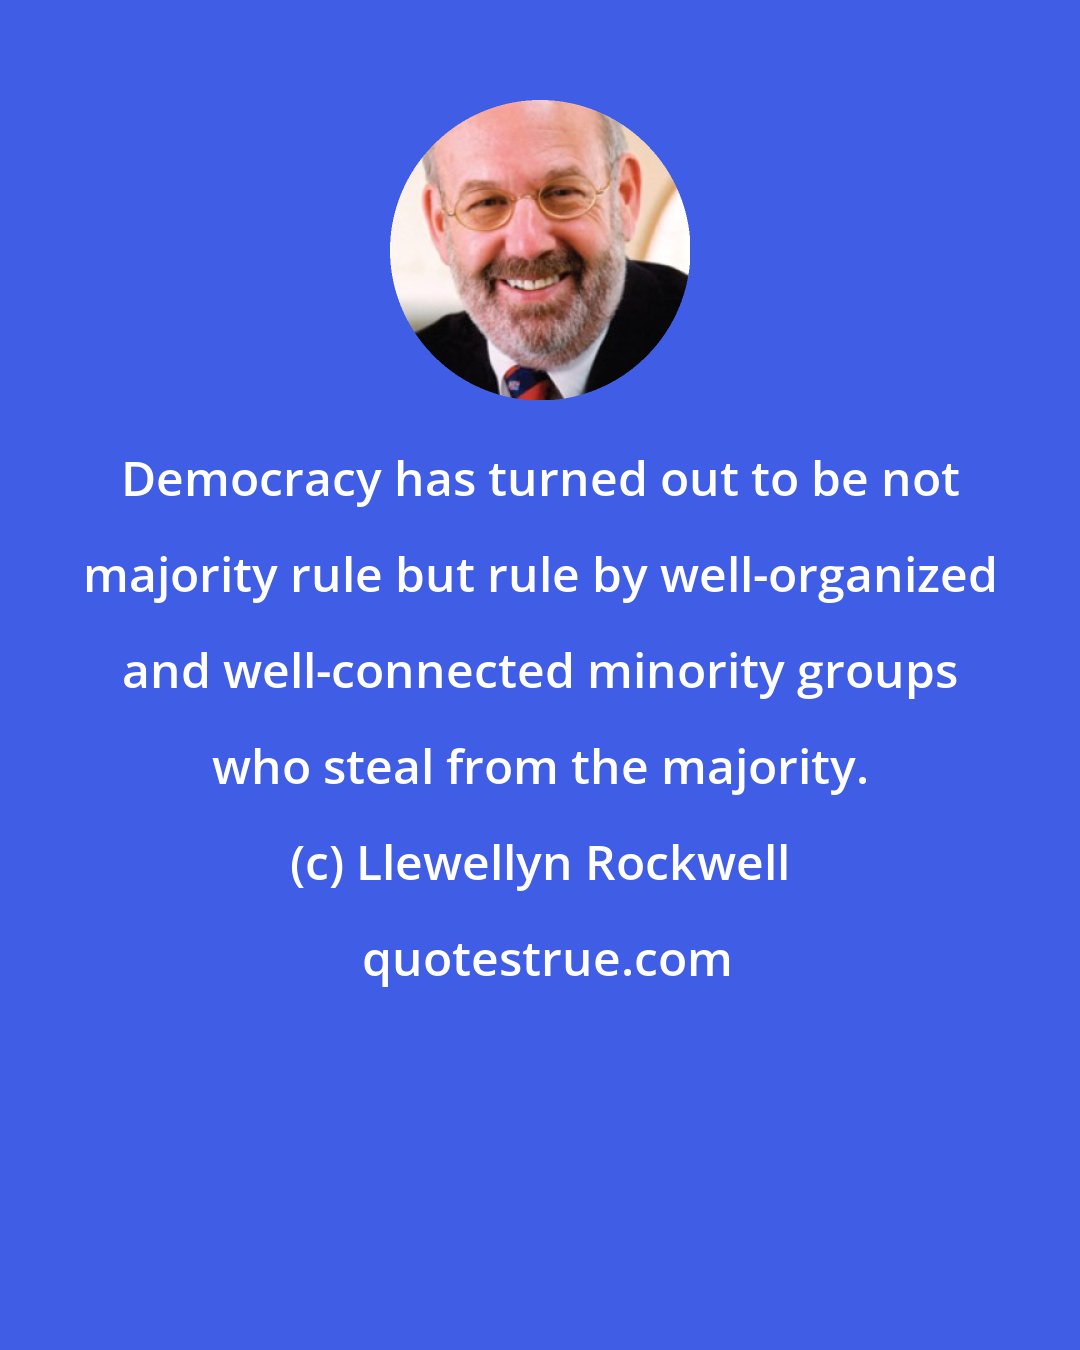 Llewellyn Rockwell: Democracy has turned out to be not majority rule but rule by well-organized and well-connected minority groups who steal from the majority.